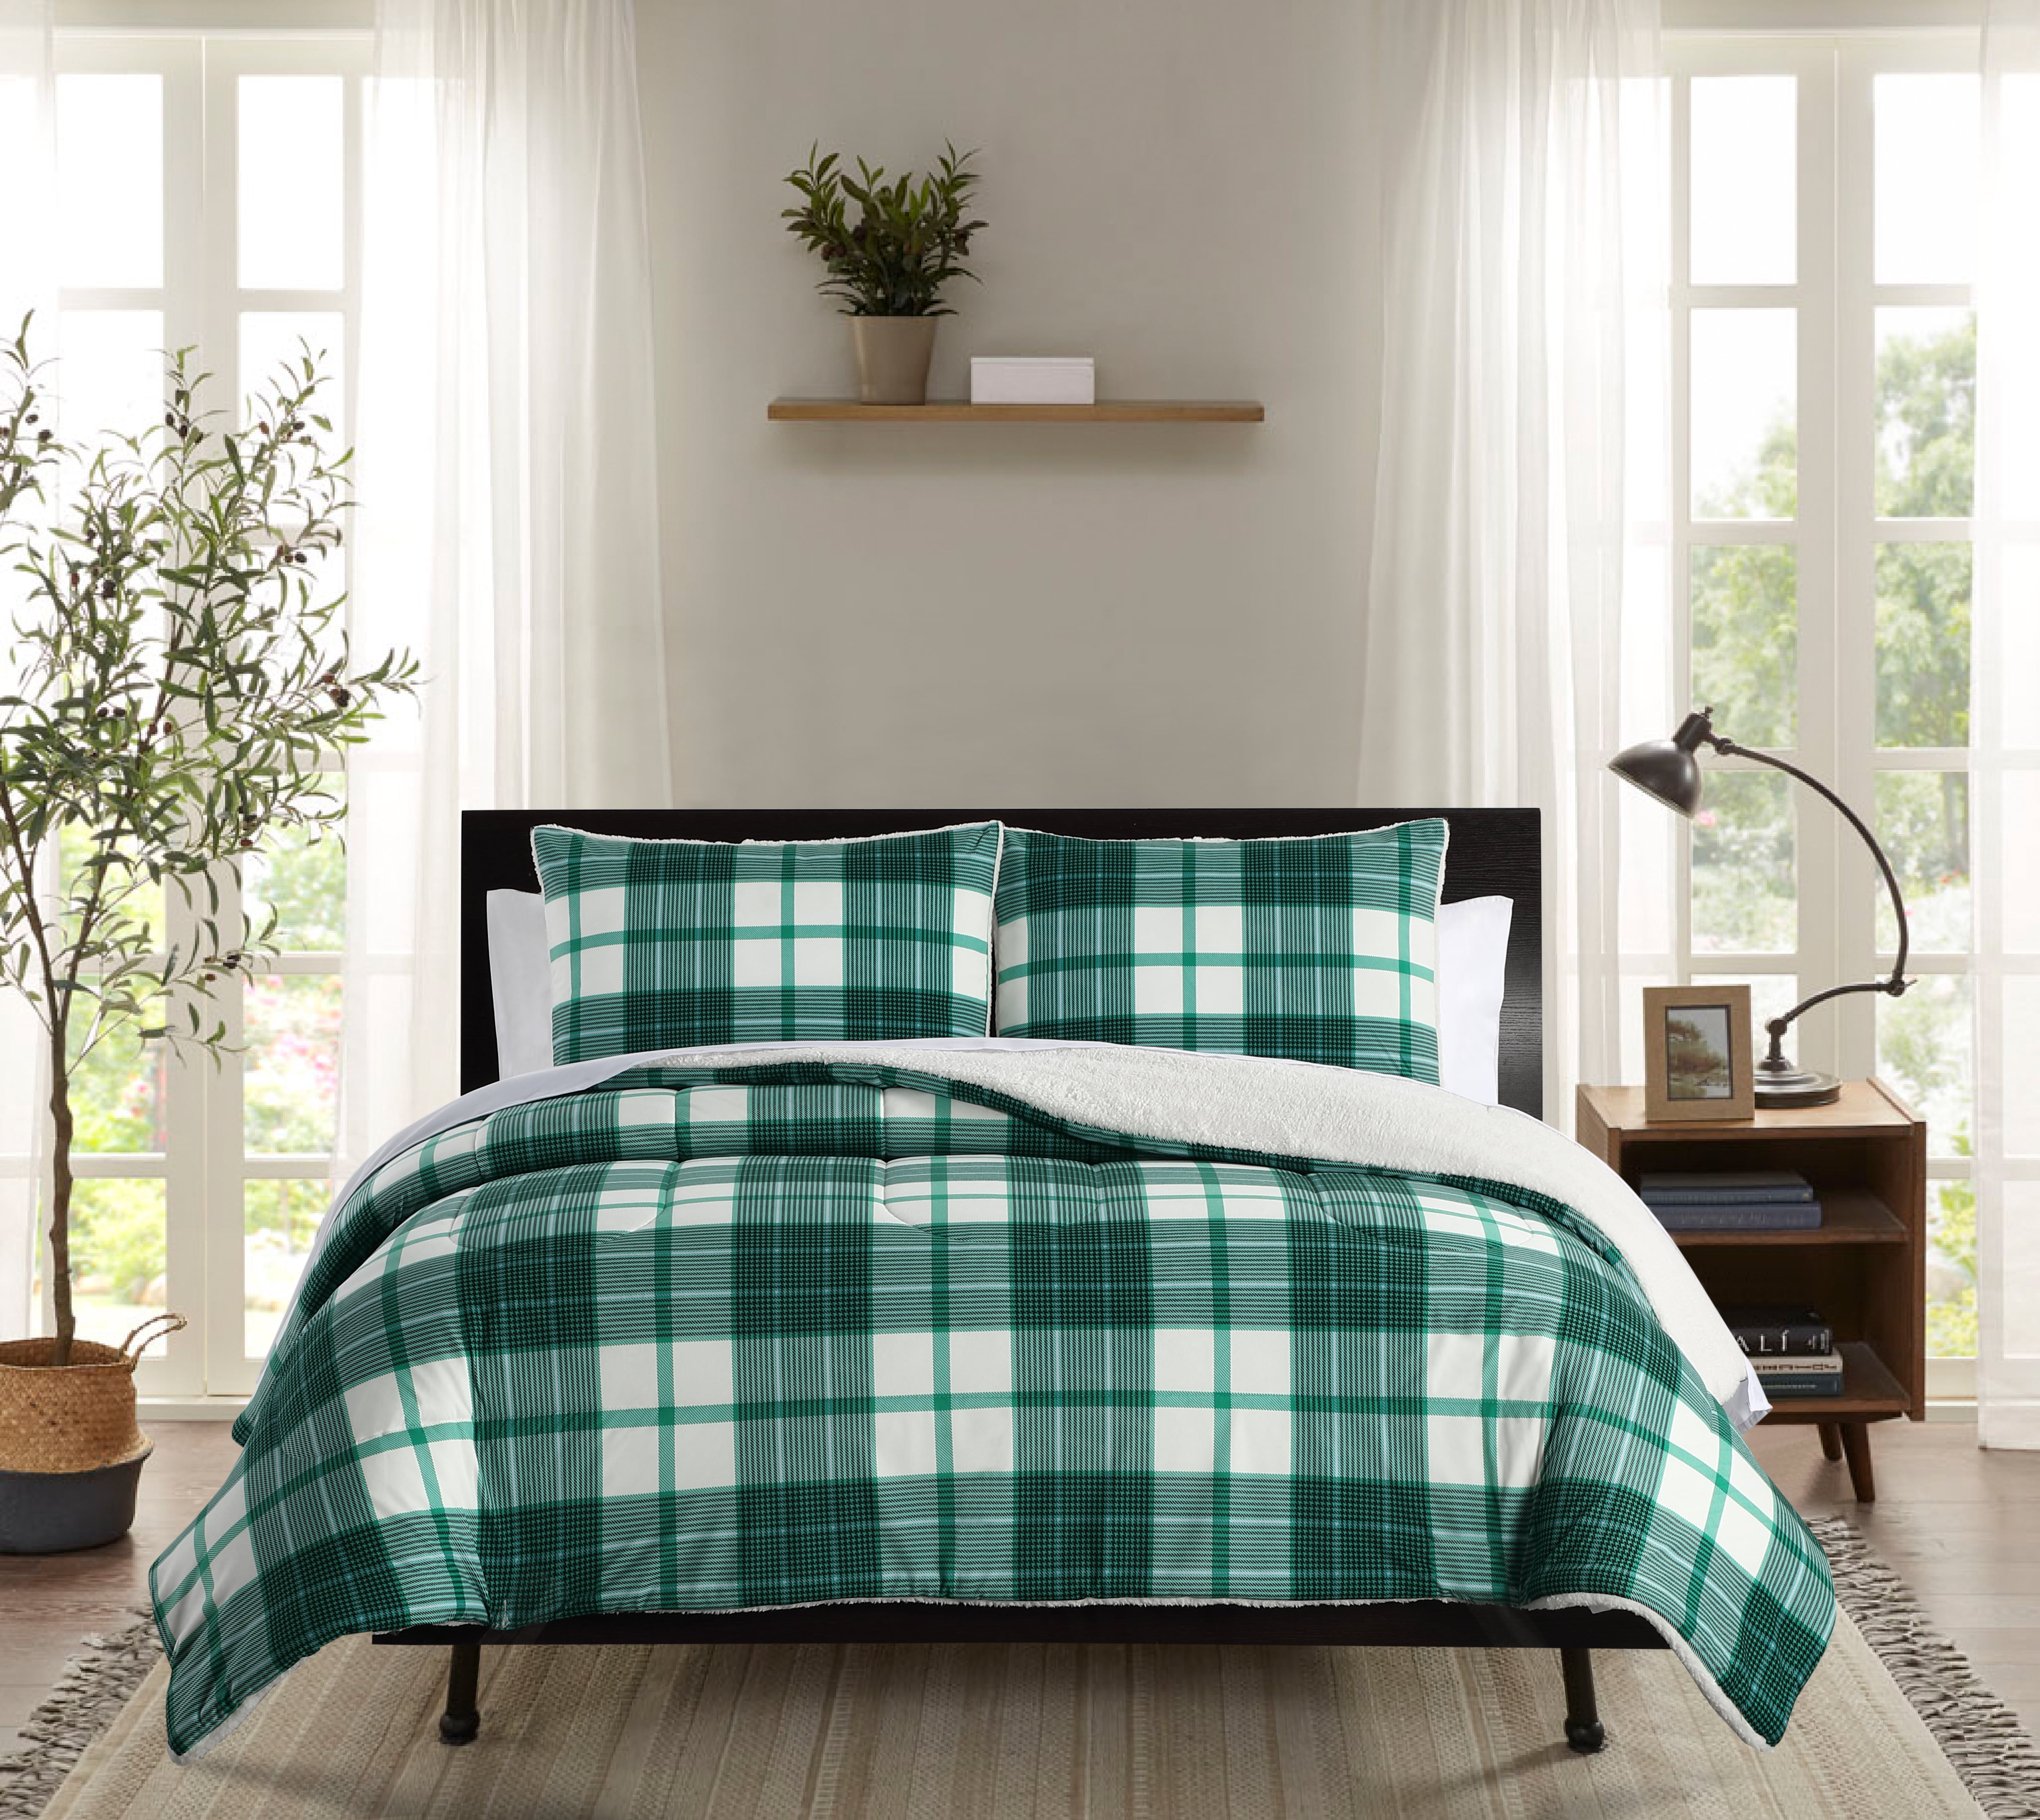 Details about   REMINGTON 4PC QUEEN SIZE SHEET SET BLUE AND GREEN PLAID NEW IN PACKAGE 